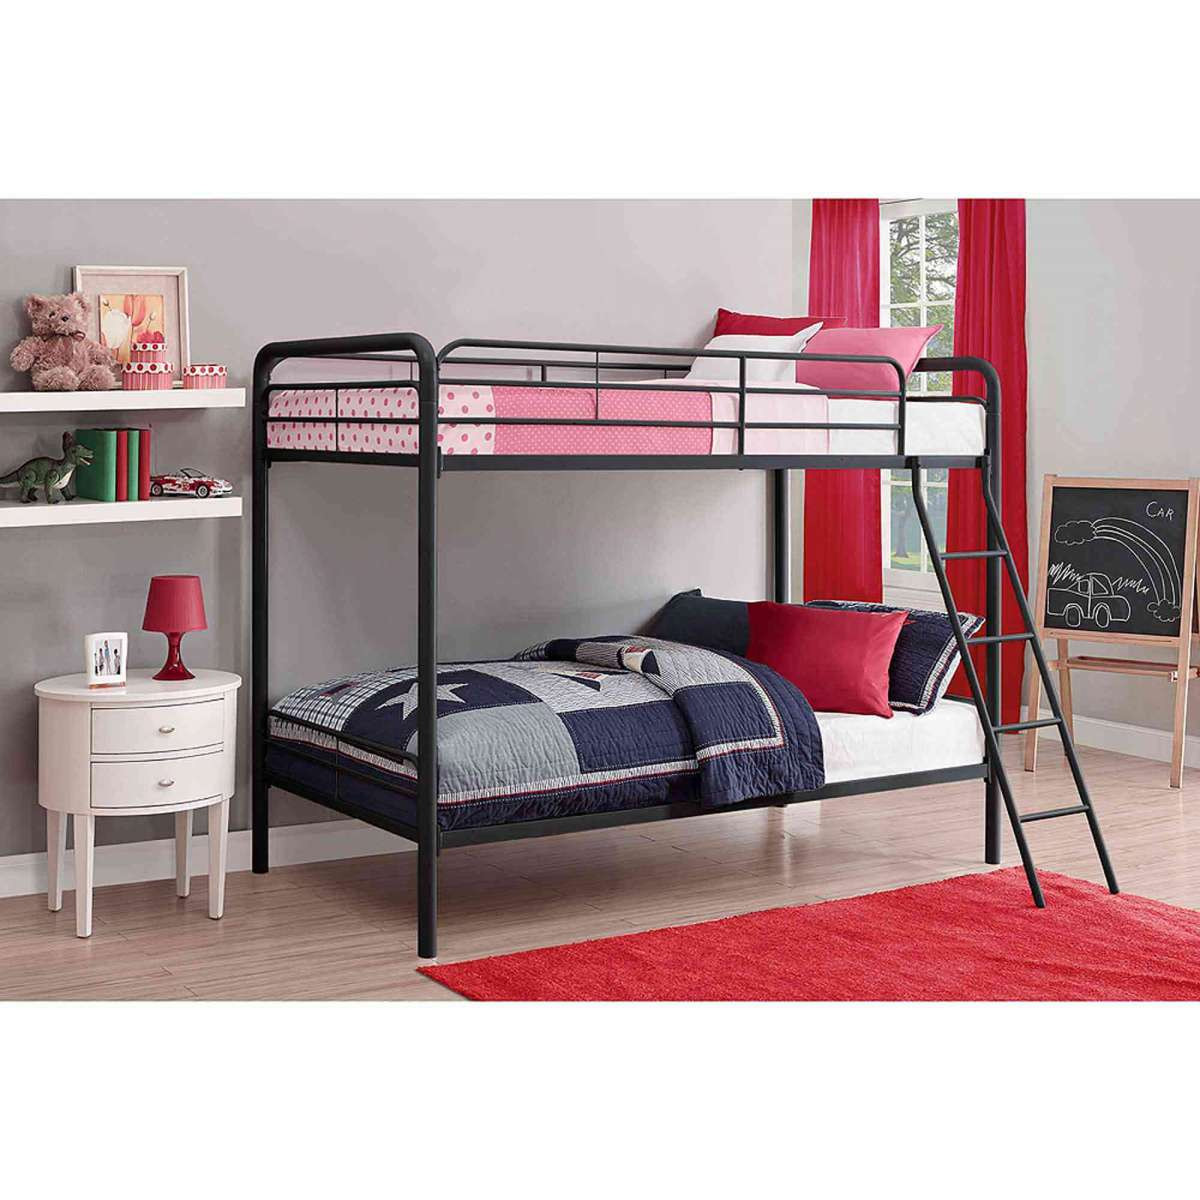 20 Lovable Cheap Vases Walmart 2024 free download cheap vases walmart of 29 walmart white bunk beds concept bed frame center page with 29 walmart white bunk beds concept